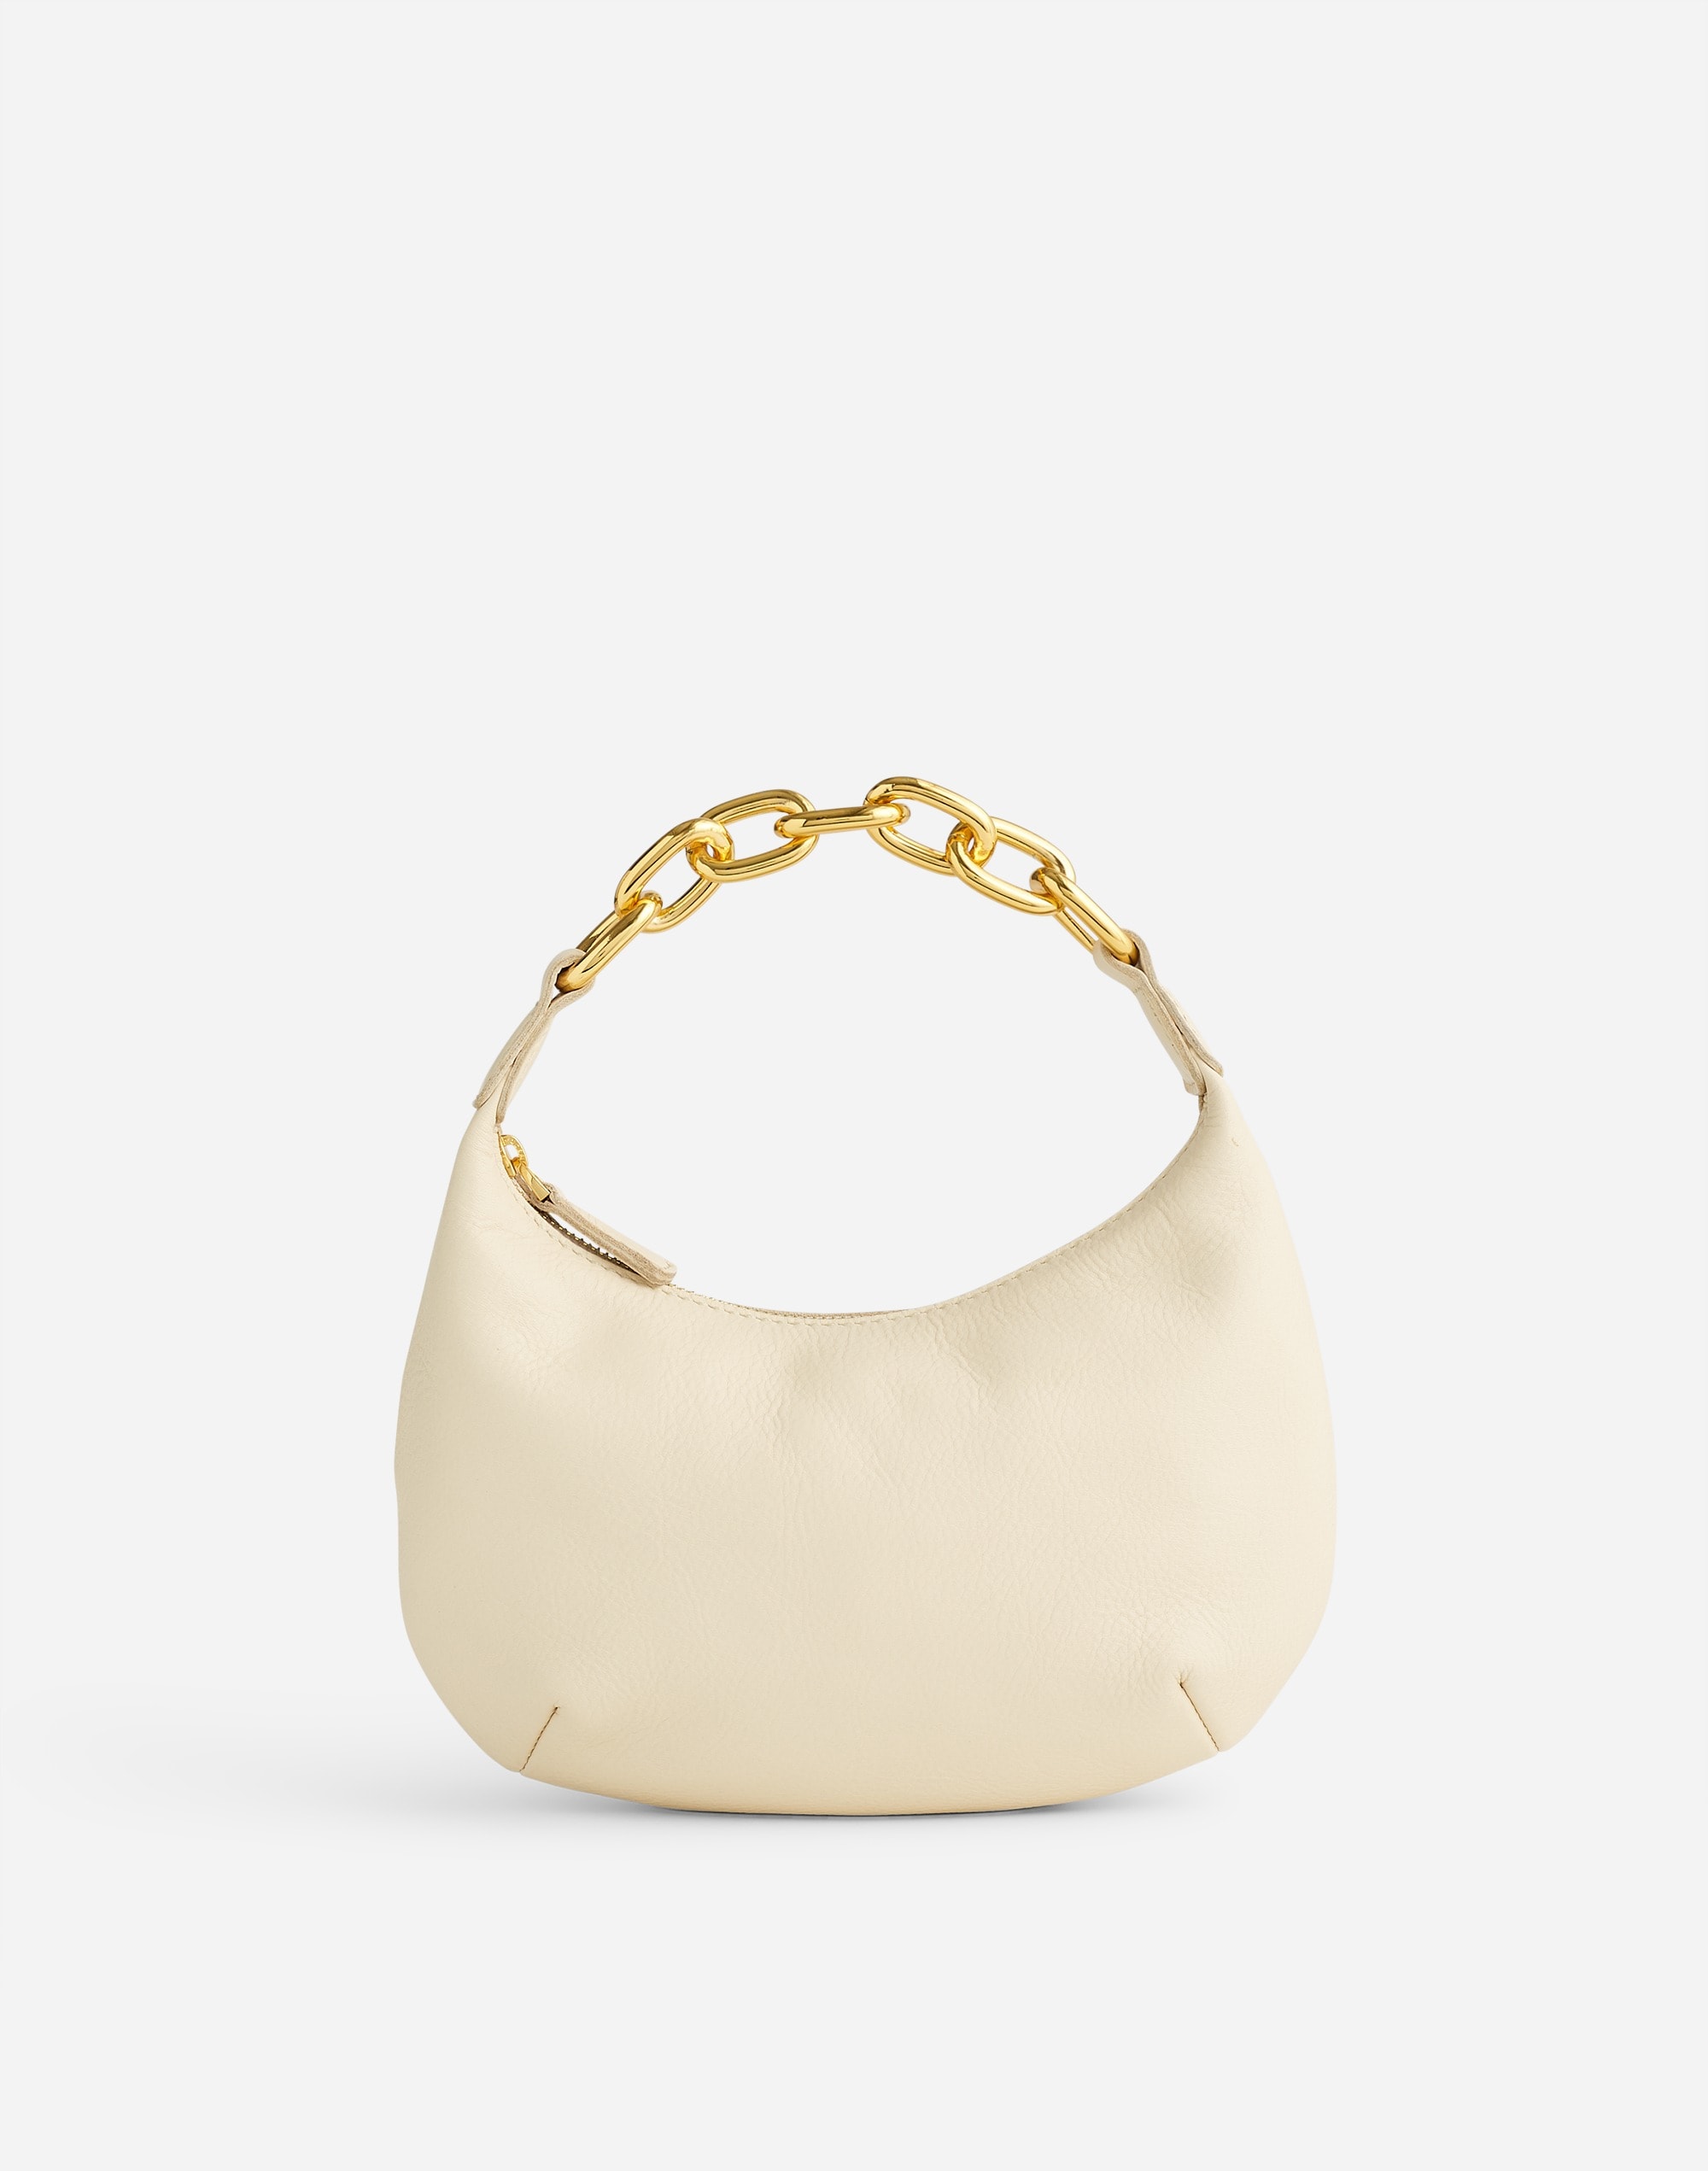 The Chain Mini Bag in Leather